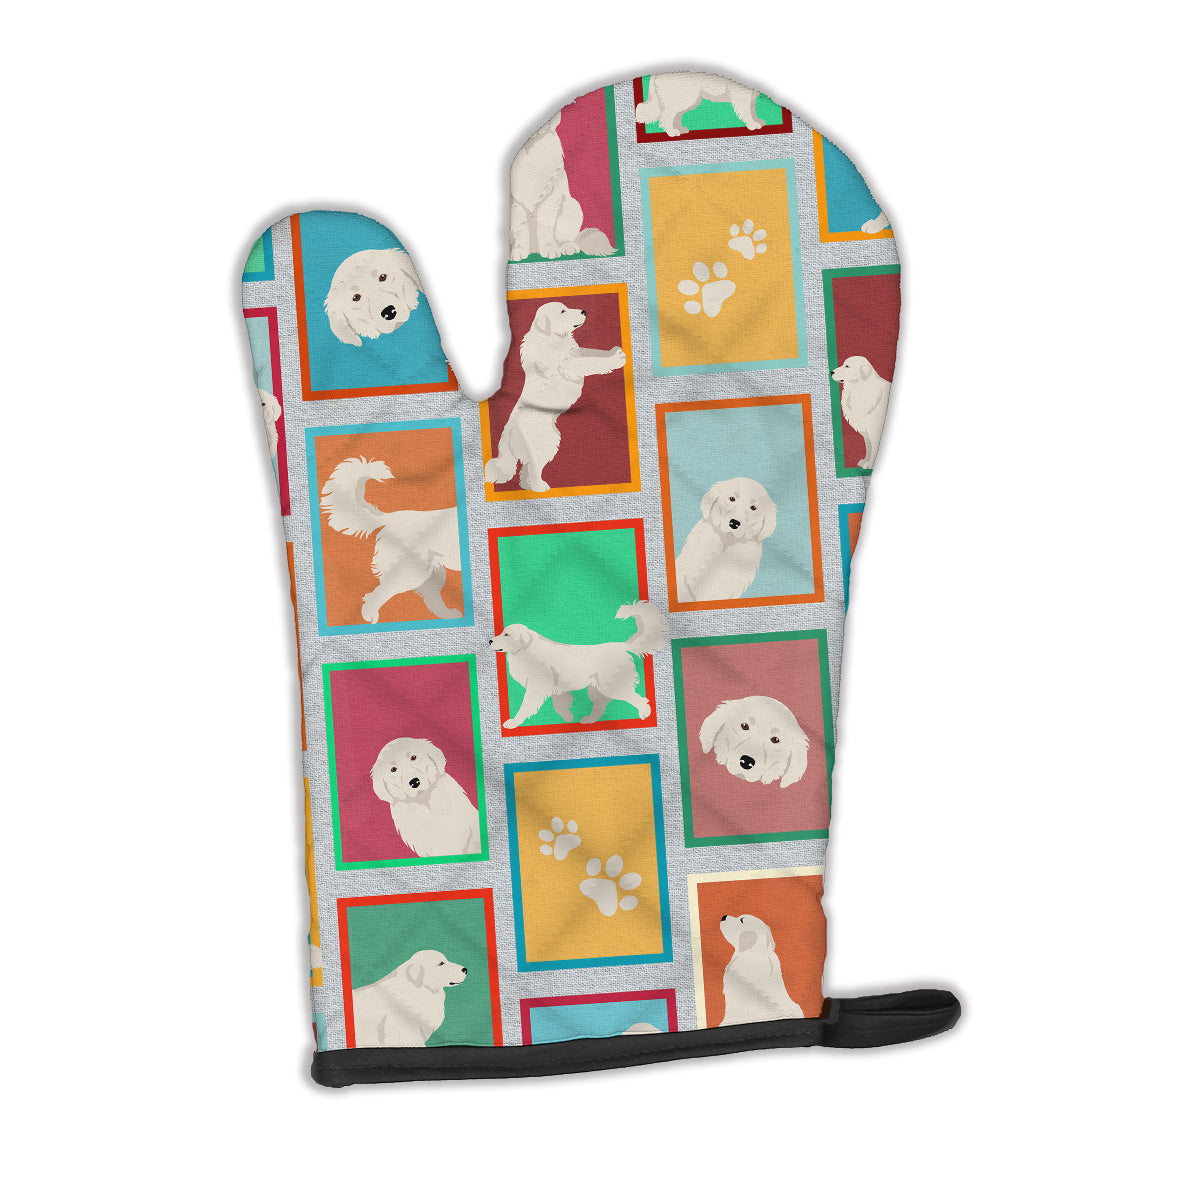 Lots of Great Pyrenees Oven Mitt